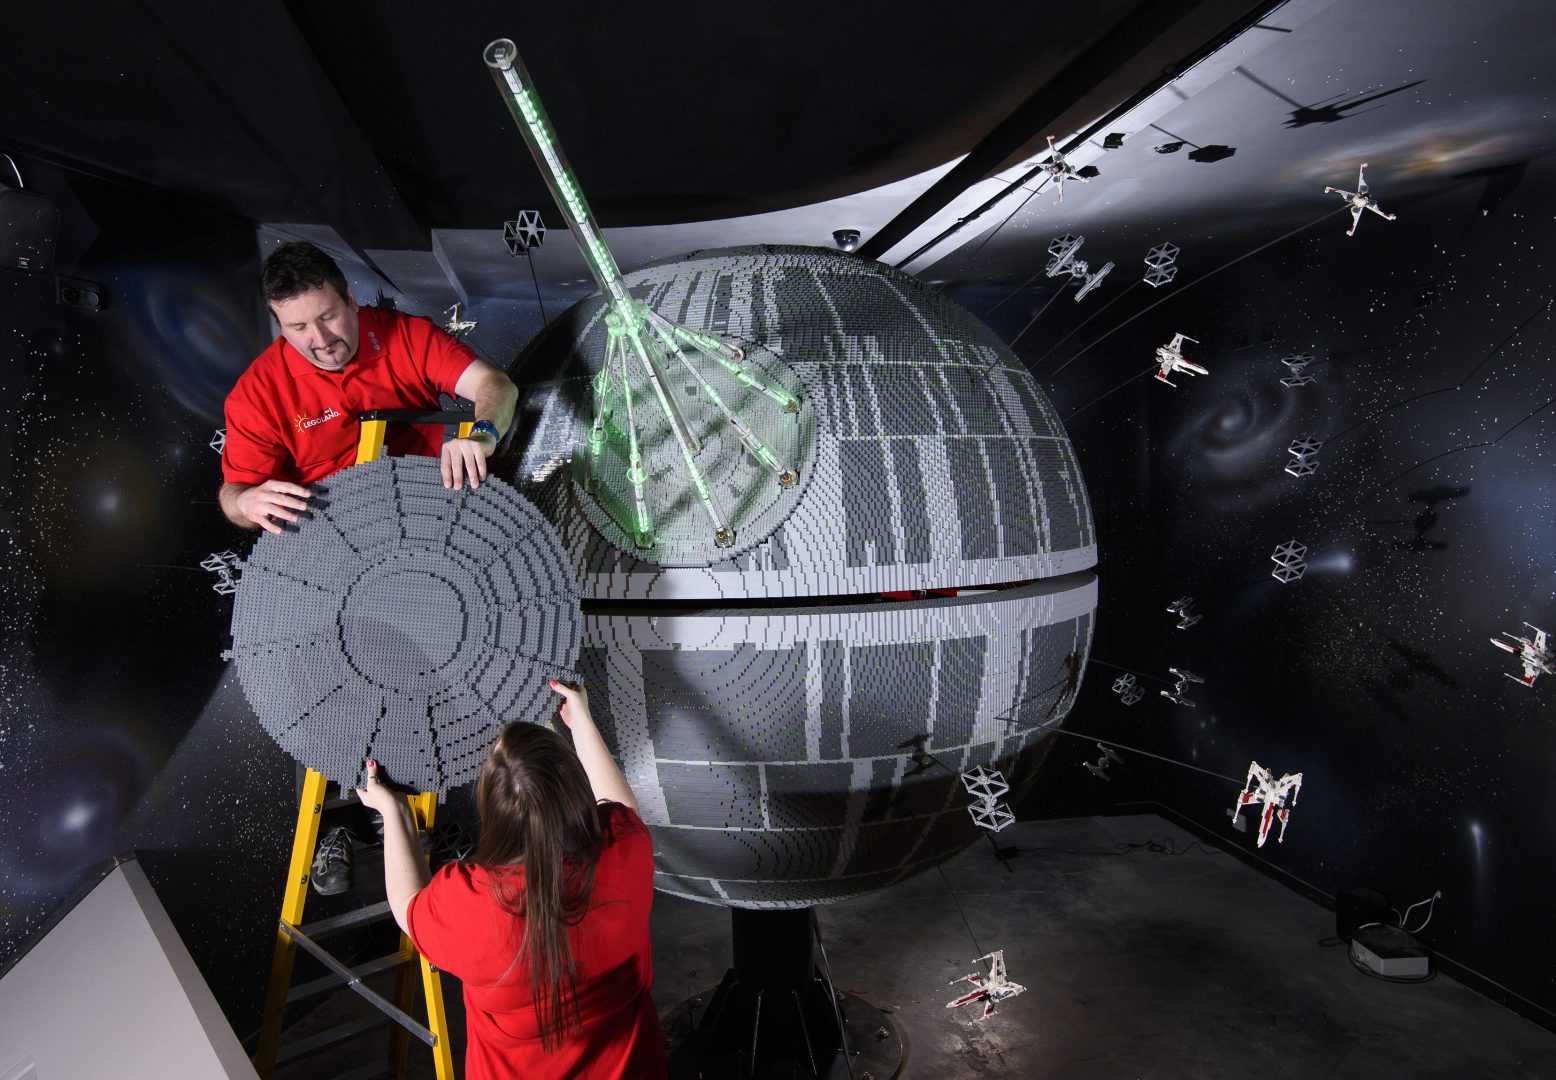 SHOT 13. Caption. ONE OF THE WORLD’S BIGGEST EVER LEGO® STAR WARS™ MODELS INSTALLED AT THE LEGOLAND® WINDSOR RESORT.   LAST PIECES PUT IN PLACE ON 500,000 LEGO® BRICK DEATH STAR LEGOLAND® Model Makers Giorgio Pastero and Phoebe Rumbol lift the top piece into place, onto one of the biggest and most impressive LEGO® Star Wars™ models ever created - a 500,000 brick LEGO® Star Wars™ recreation of The Death Star. The operation took three days as the massive new 2.4 metre wide, 3 metre high creation was carefully hoisted into position and the final bricks were put in place. The hefty 860kg perfectly spherical model took 15 Model Makers three months to build and will be the centrepiece of an epic new finale at the LEGO®Star Wars™ Miniland Model Display when the Resort opens on 11 March and guests will be able to trigger special effects and bright the scene to life. TM & © Lucasfilm Ltd. All rights reserved